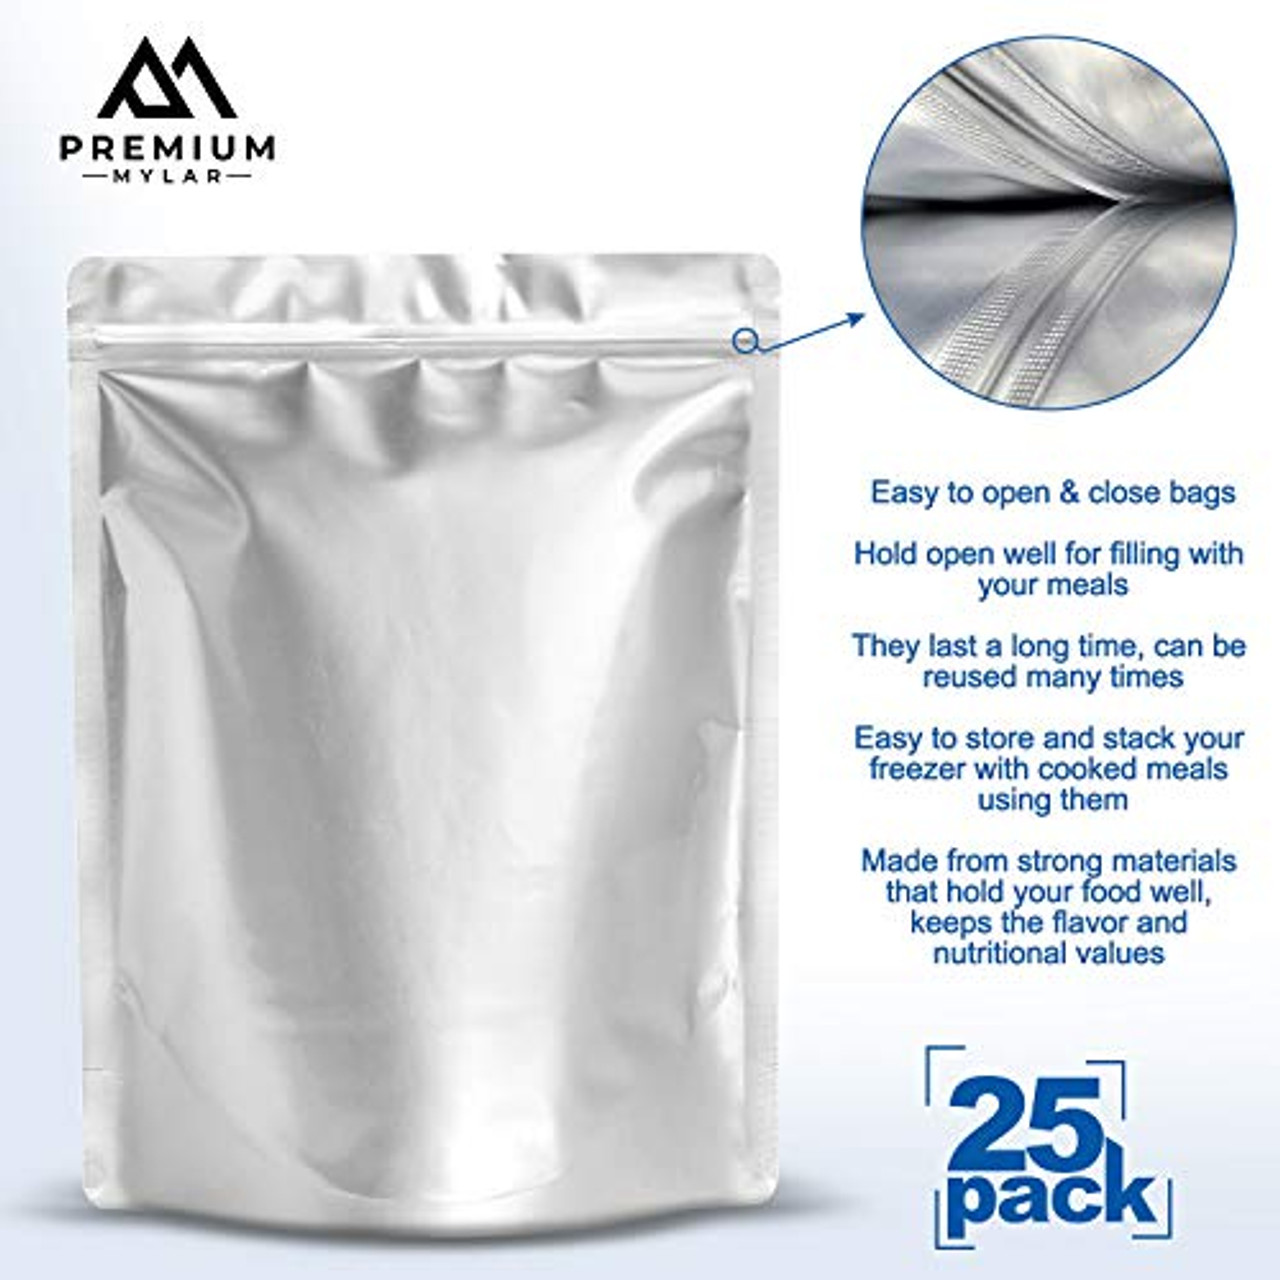 50 Mylar Bags 1 Gallon - Extra Thick 7.4 Mil - 10x14 Airtight Vacuum  Sealing Sealable Mylar Bags for Long Term Food Storage - Odor Free Heat  Resistant - Light and Moisture Proof Fresh Saver Packs